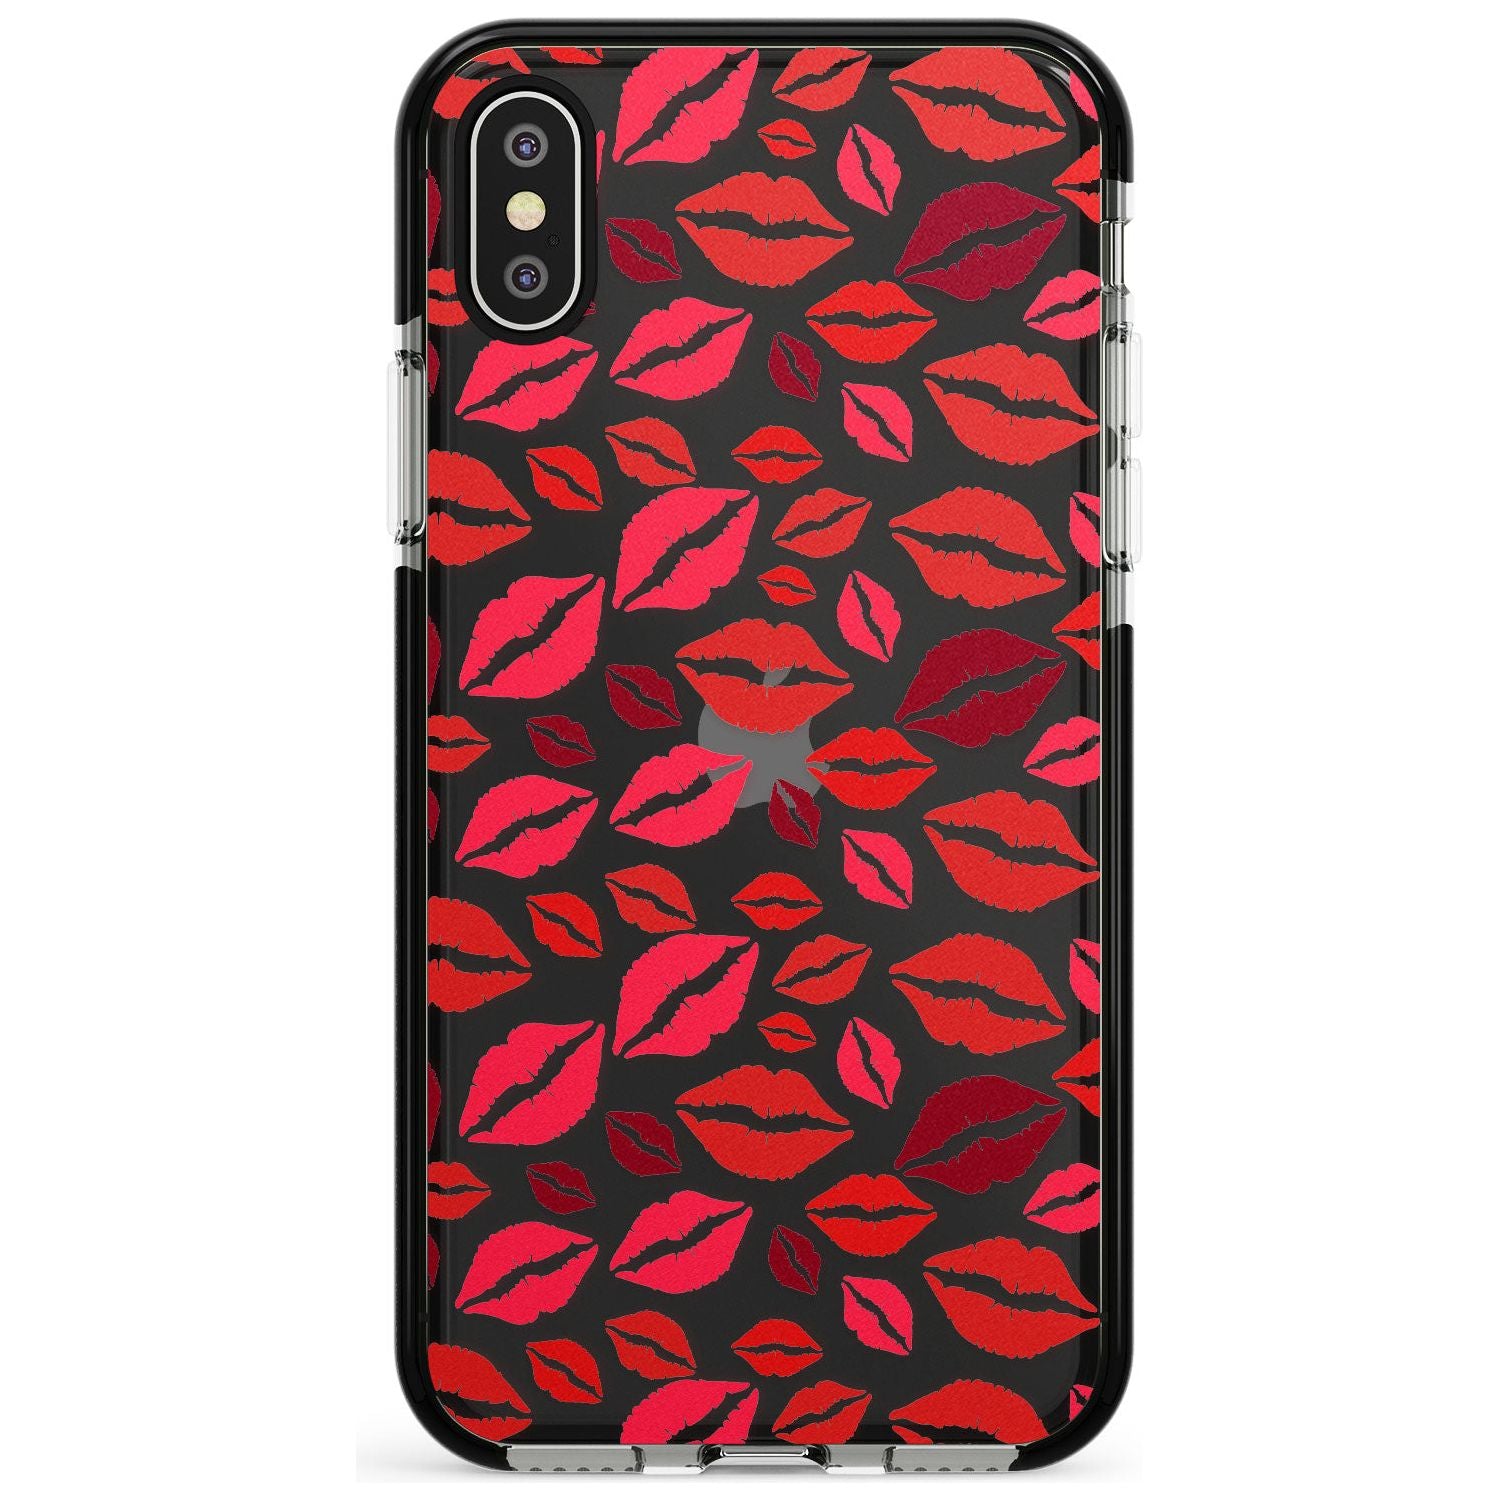 Lips Pattern Pink Fade Impact Phone Case for iPhone X XS Max XR